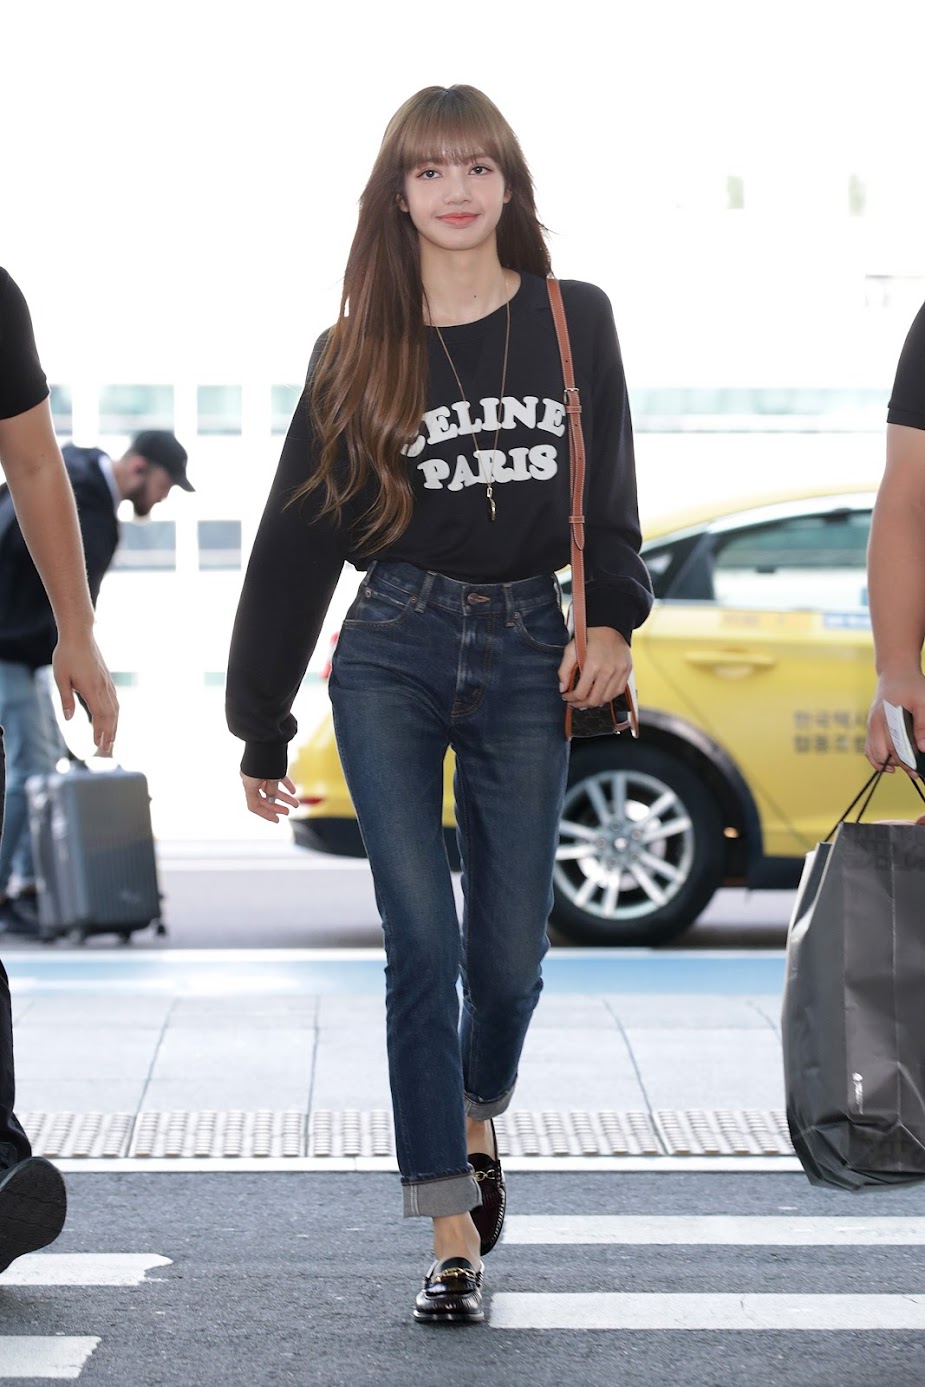 Lisa on X: Lisa gave all the members Celine clothes in collab